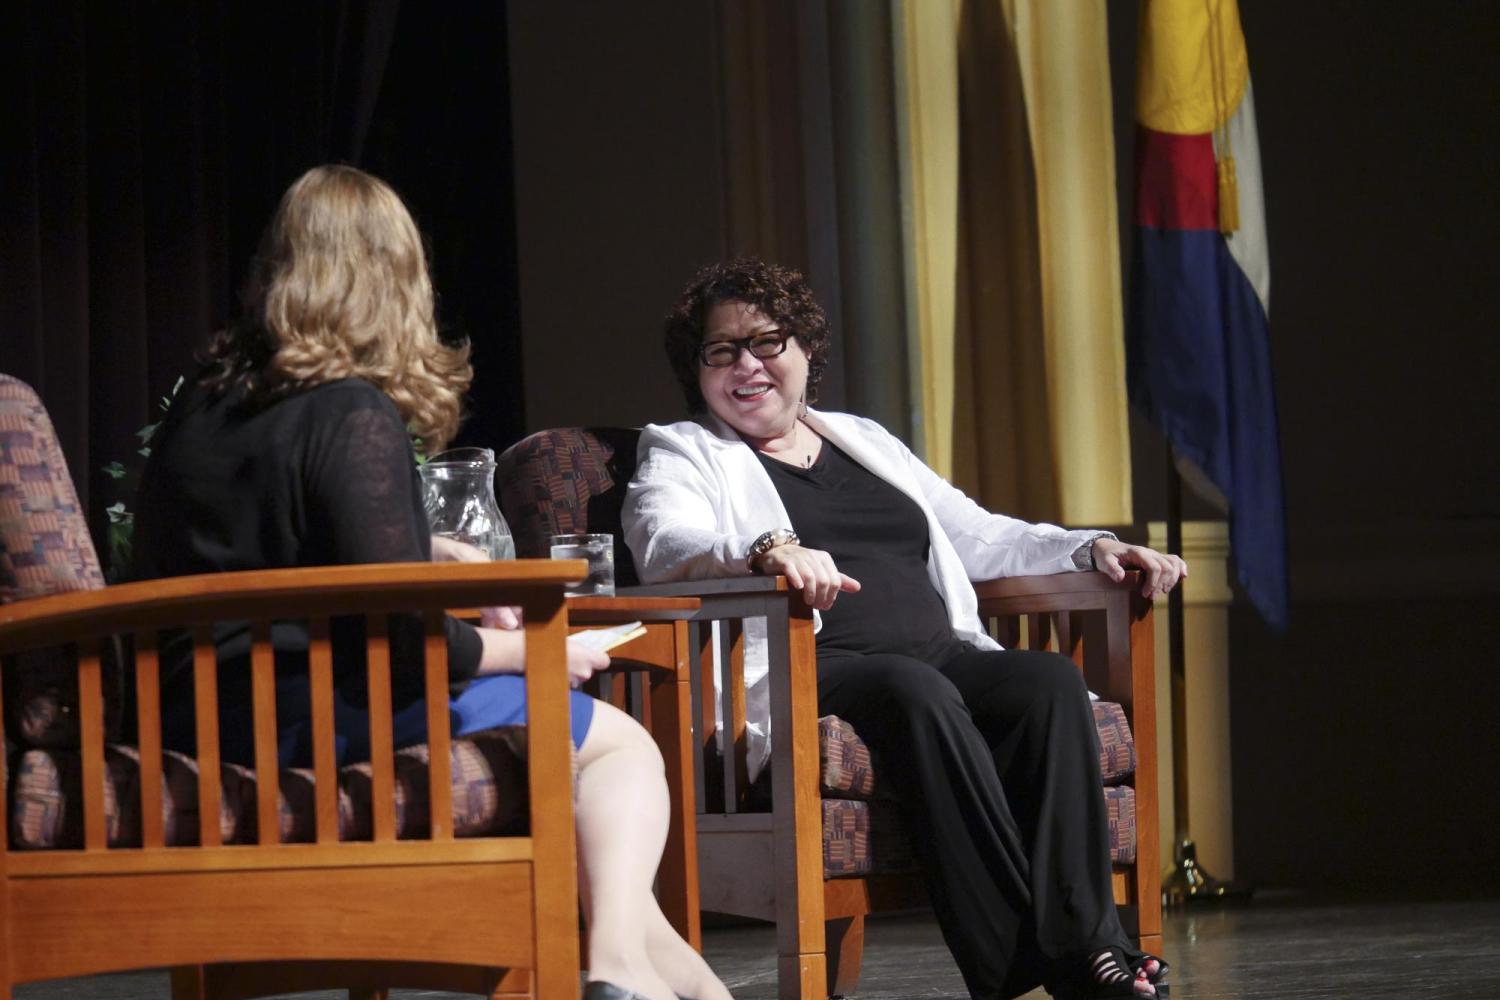 5th Annual Stevens Lecture with Justice Sonia Sotomayor